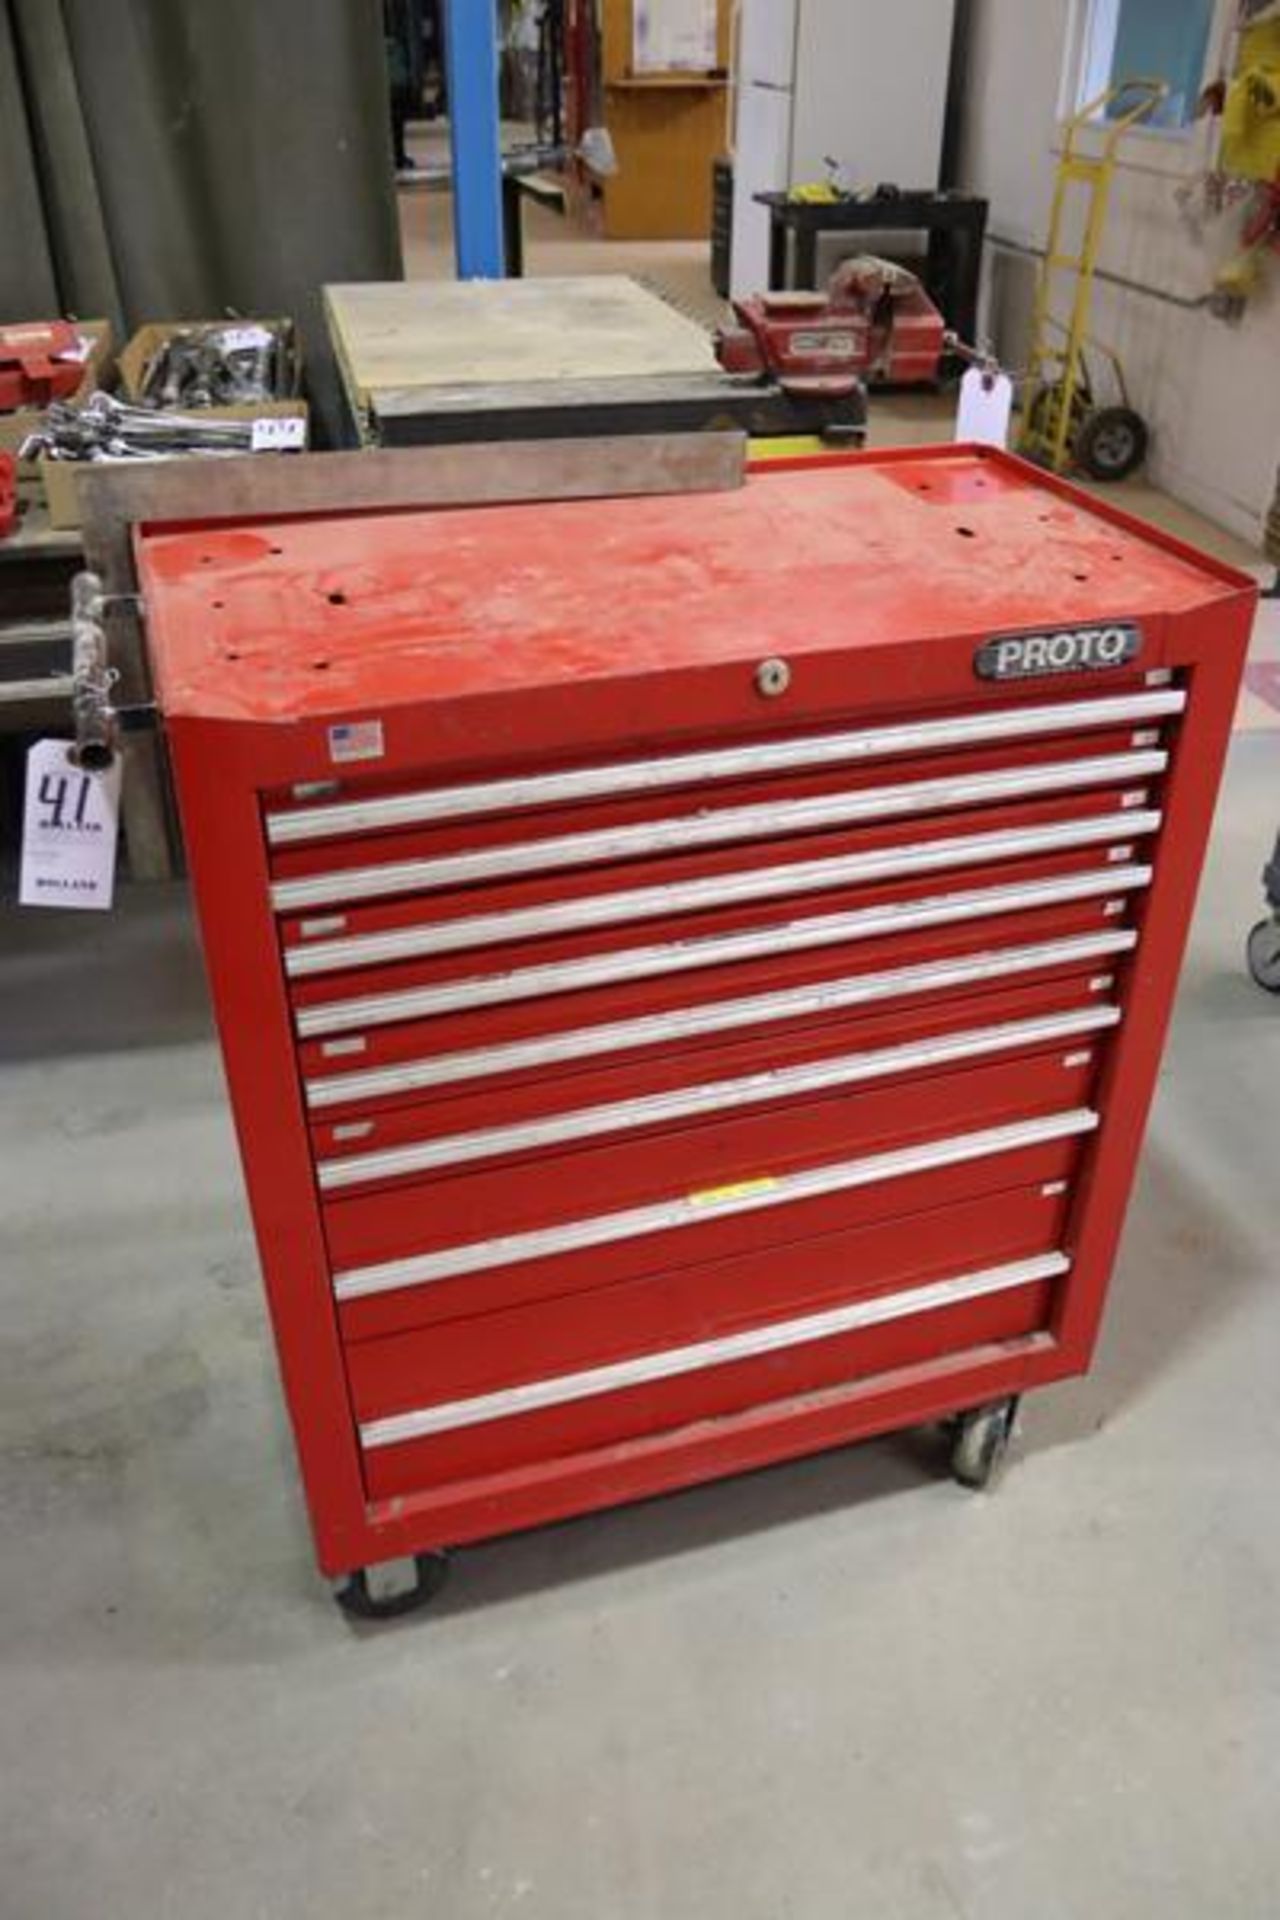 Proto Roll Around 8-Drawer Tool Box with Contents